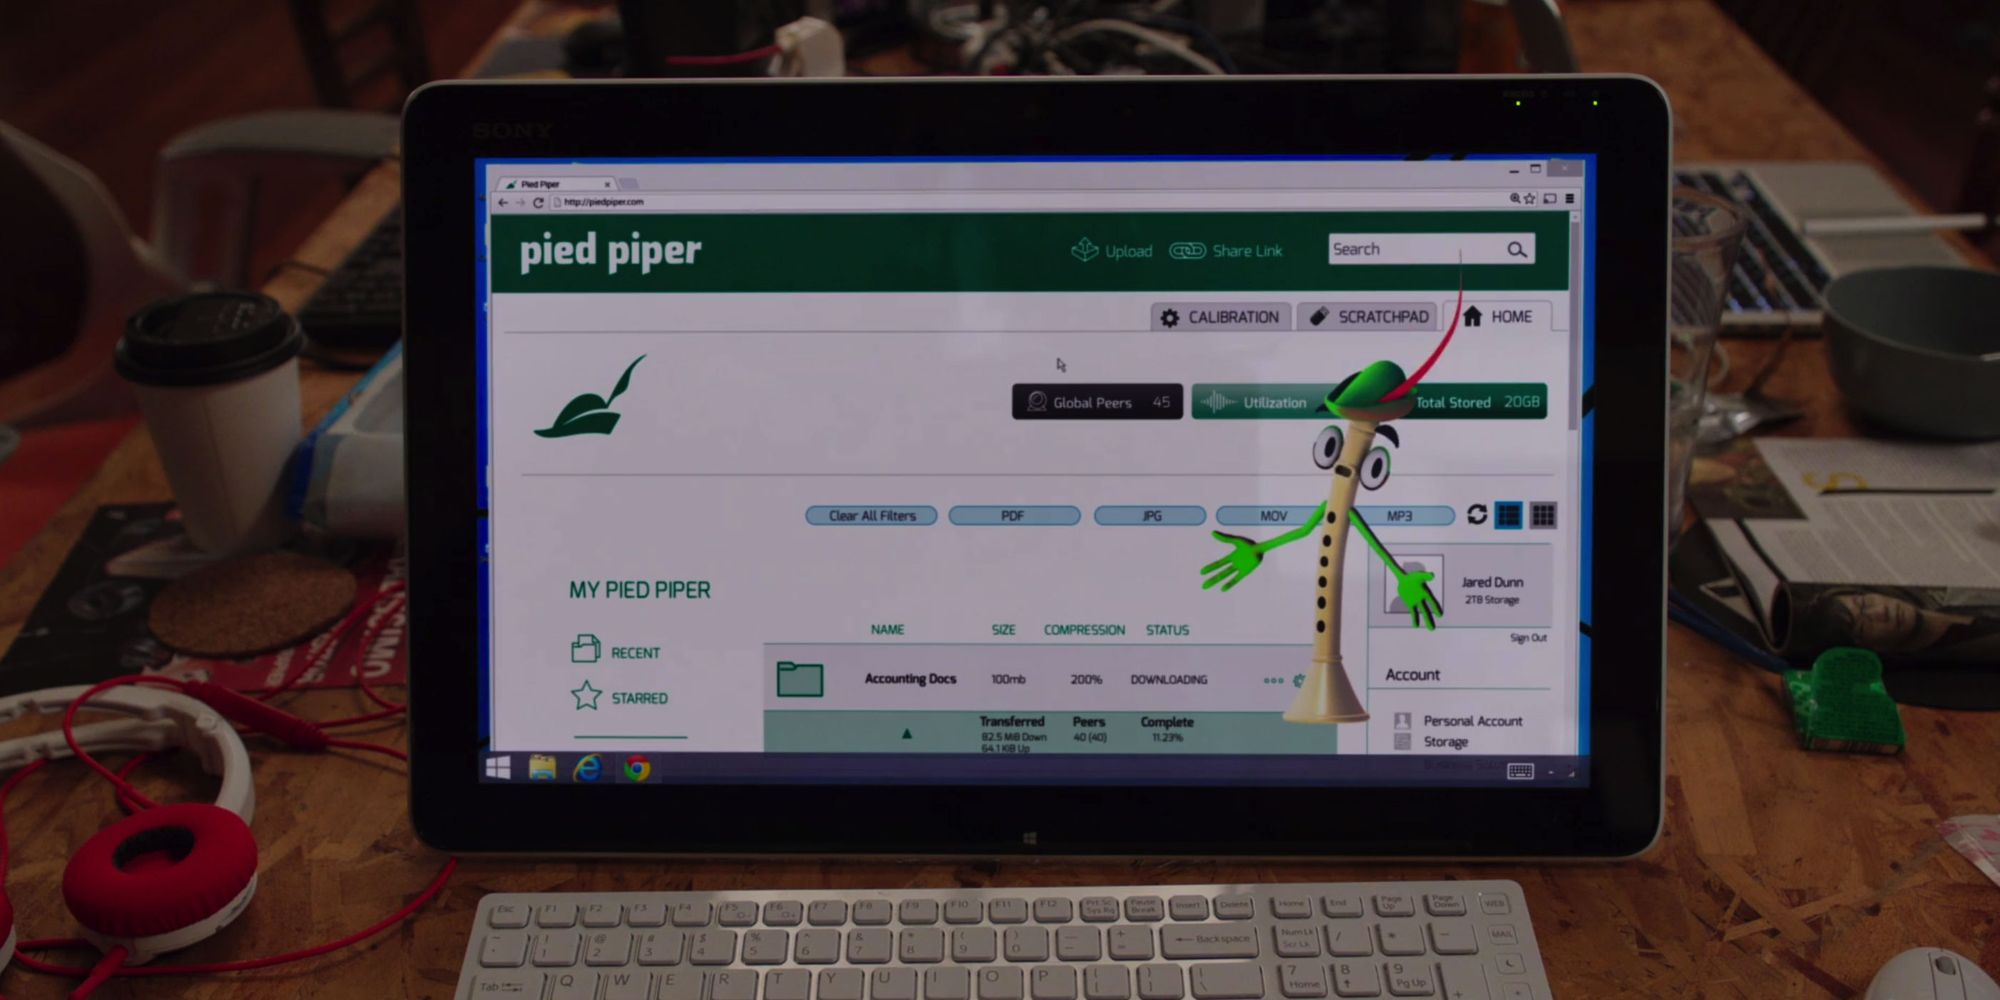 pied-piper-user-interface